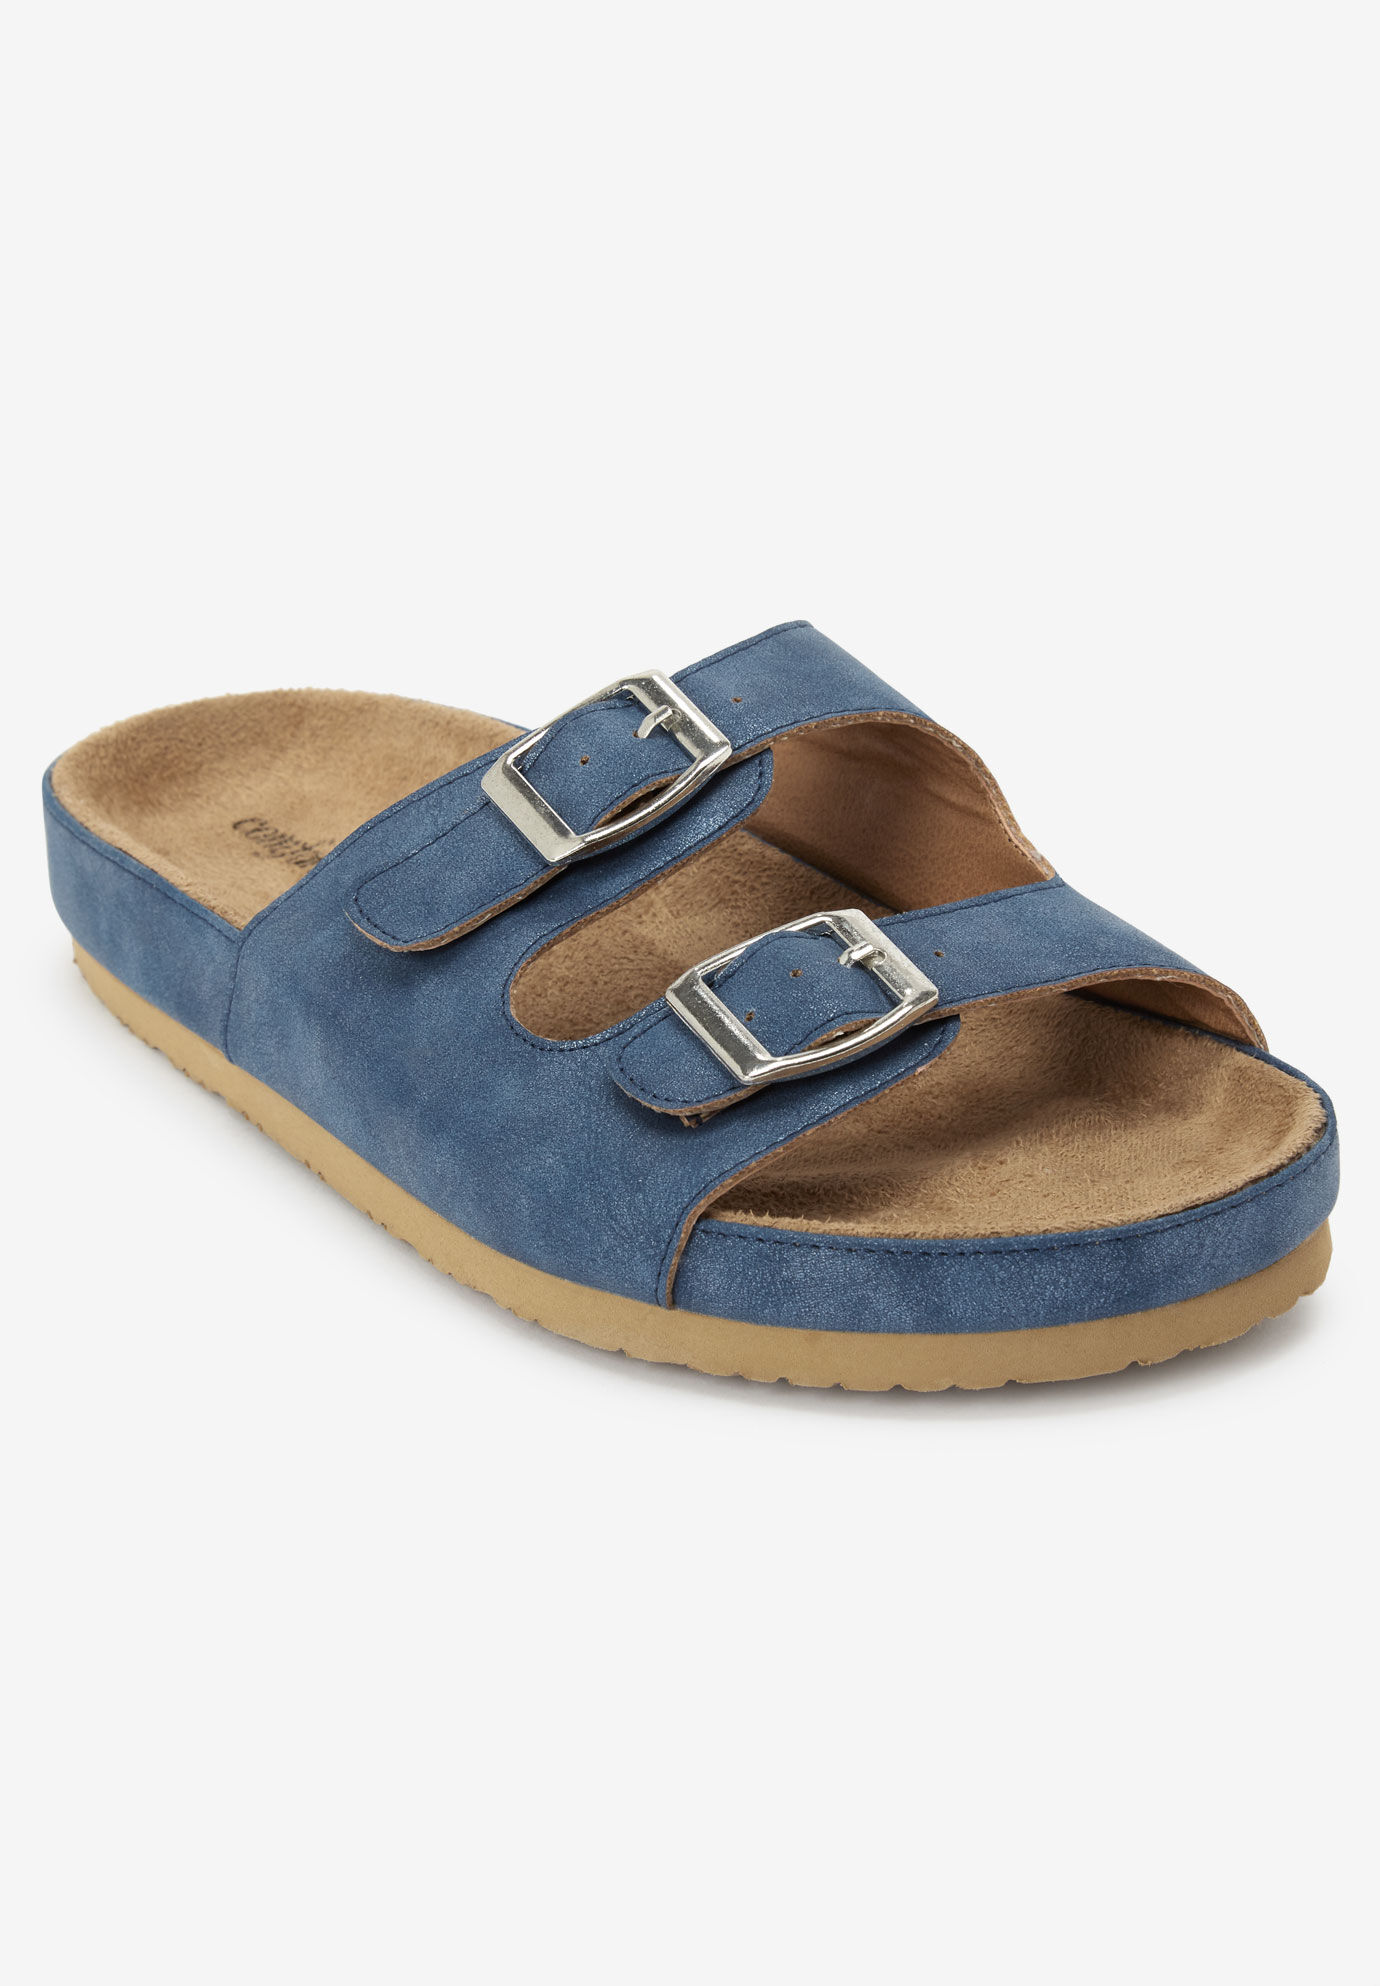 wide width athletic sandals